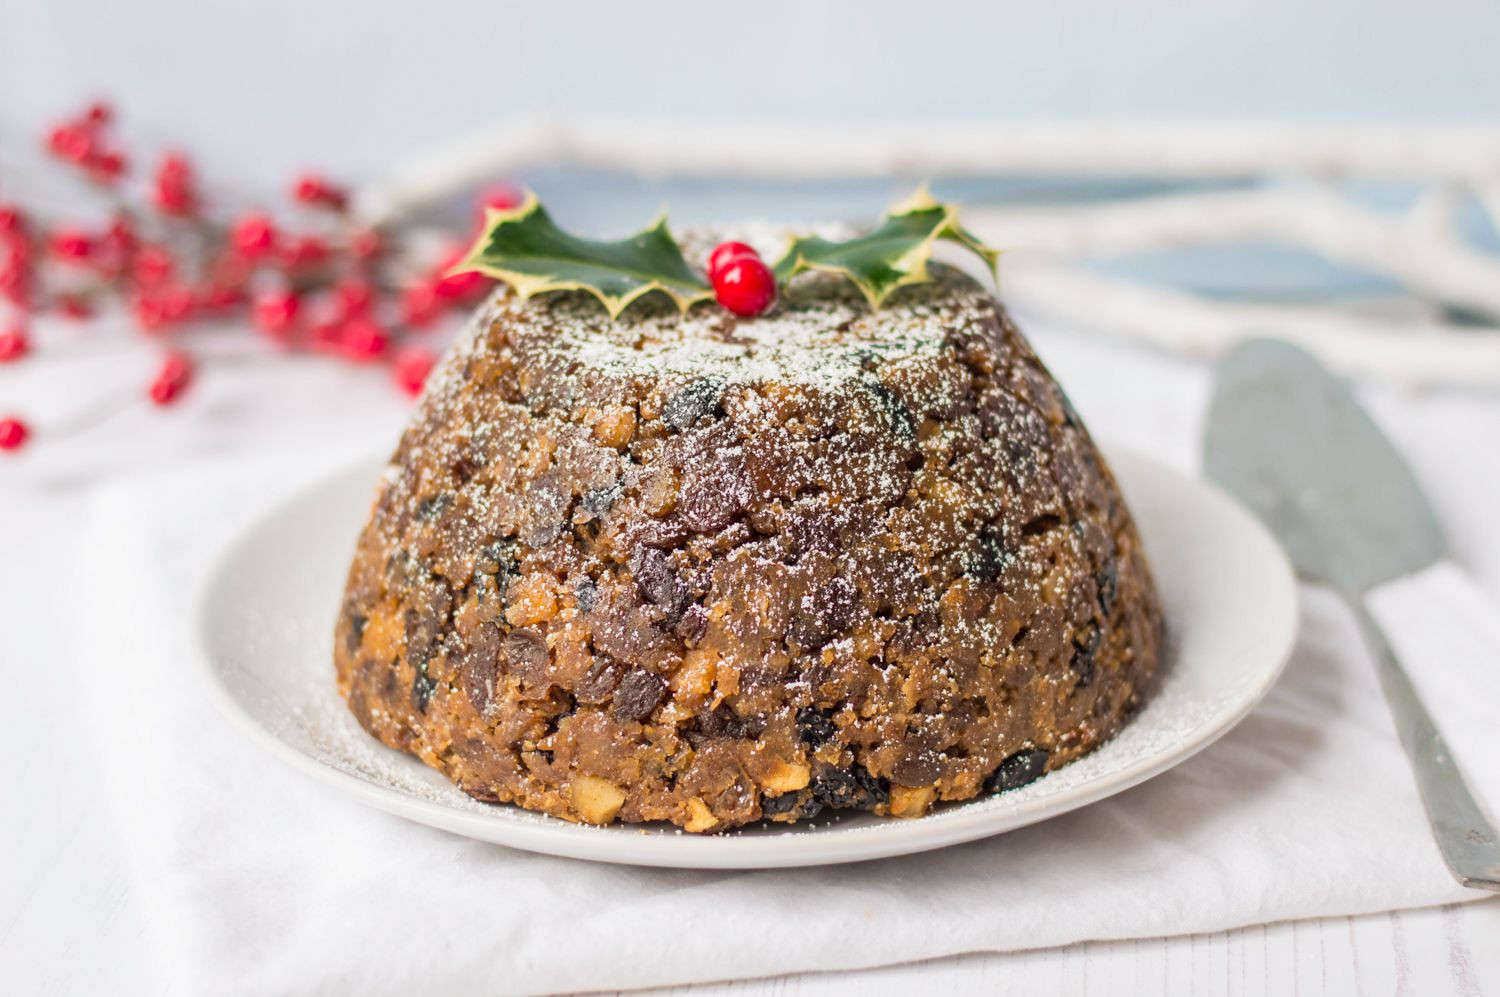 Traditional English Christmas Desserts
 Best British Christmas Desserts